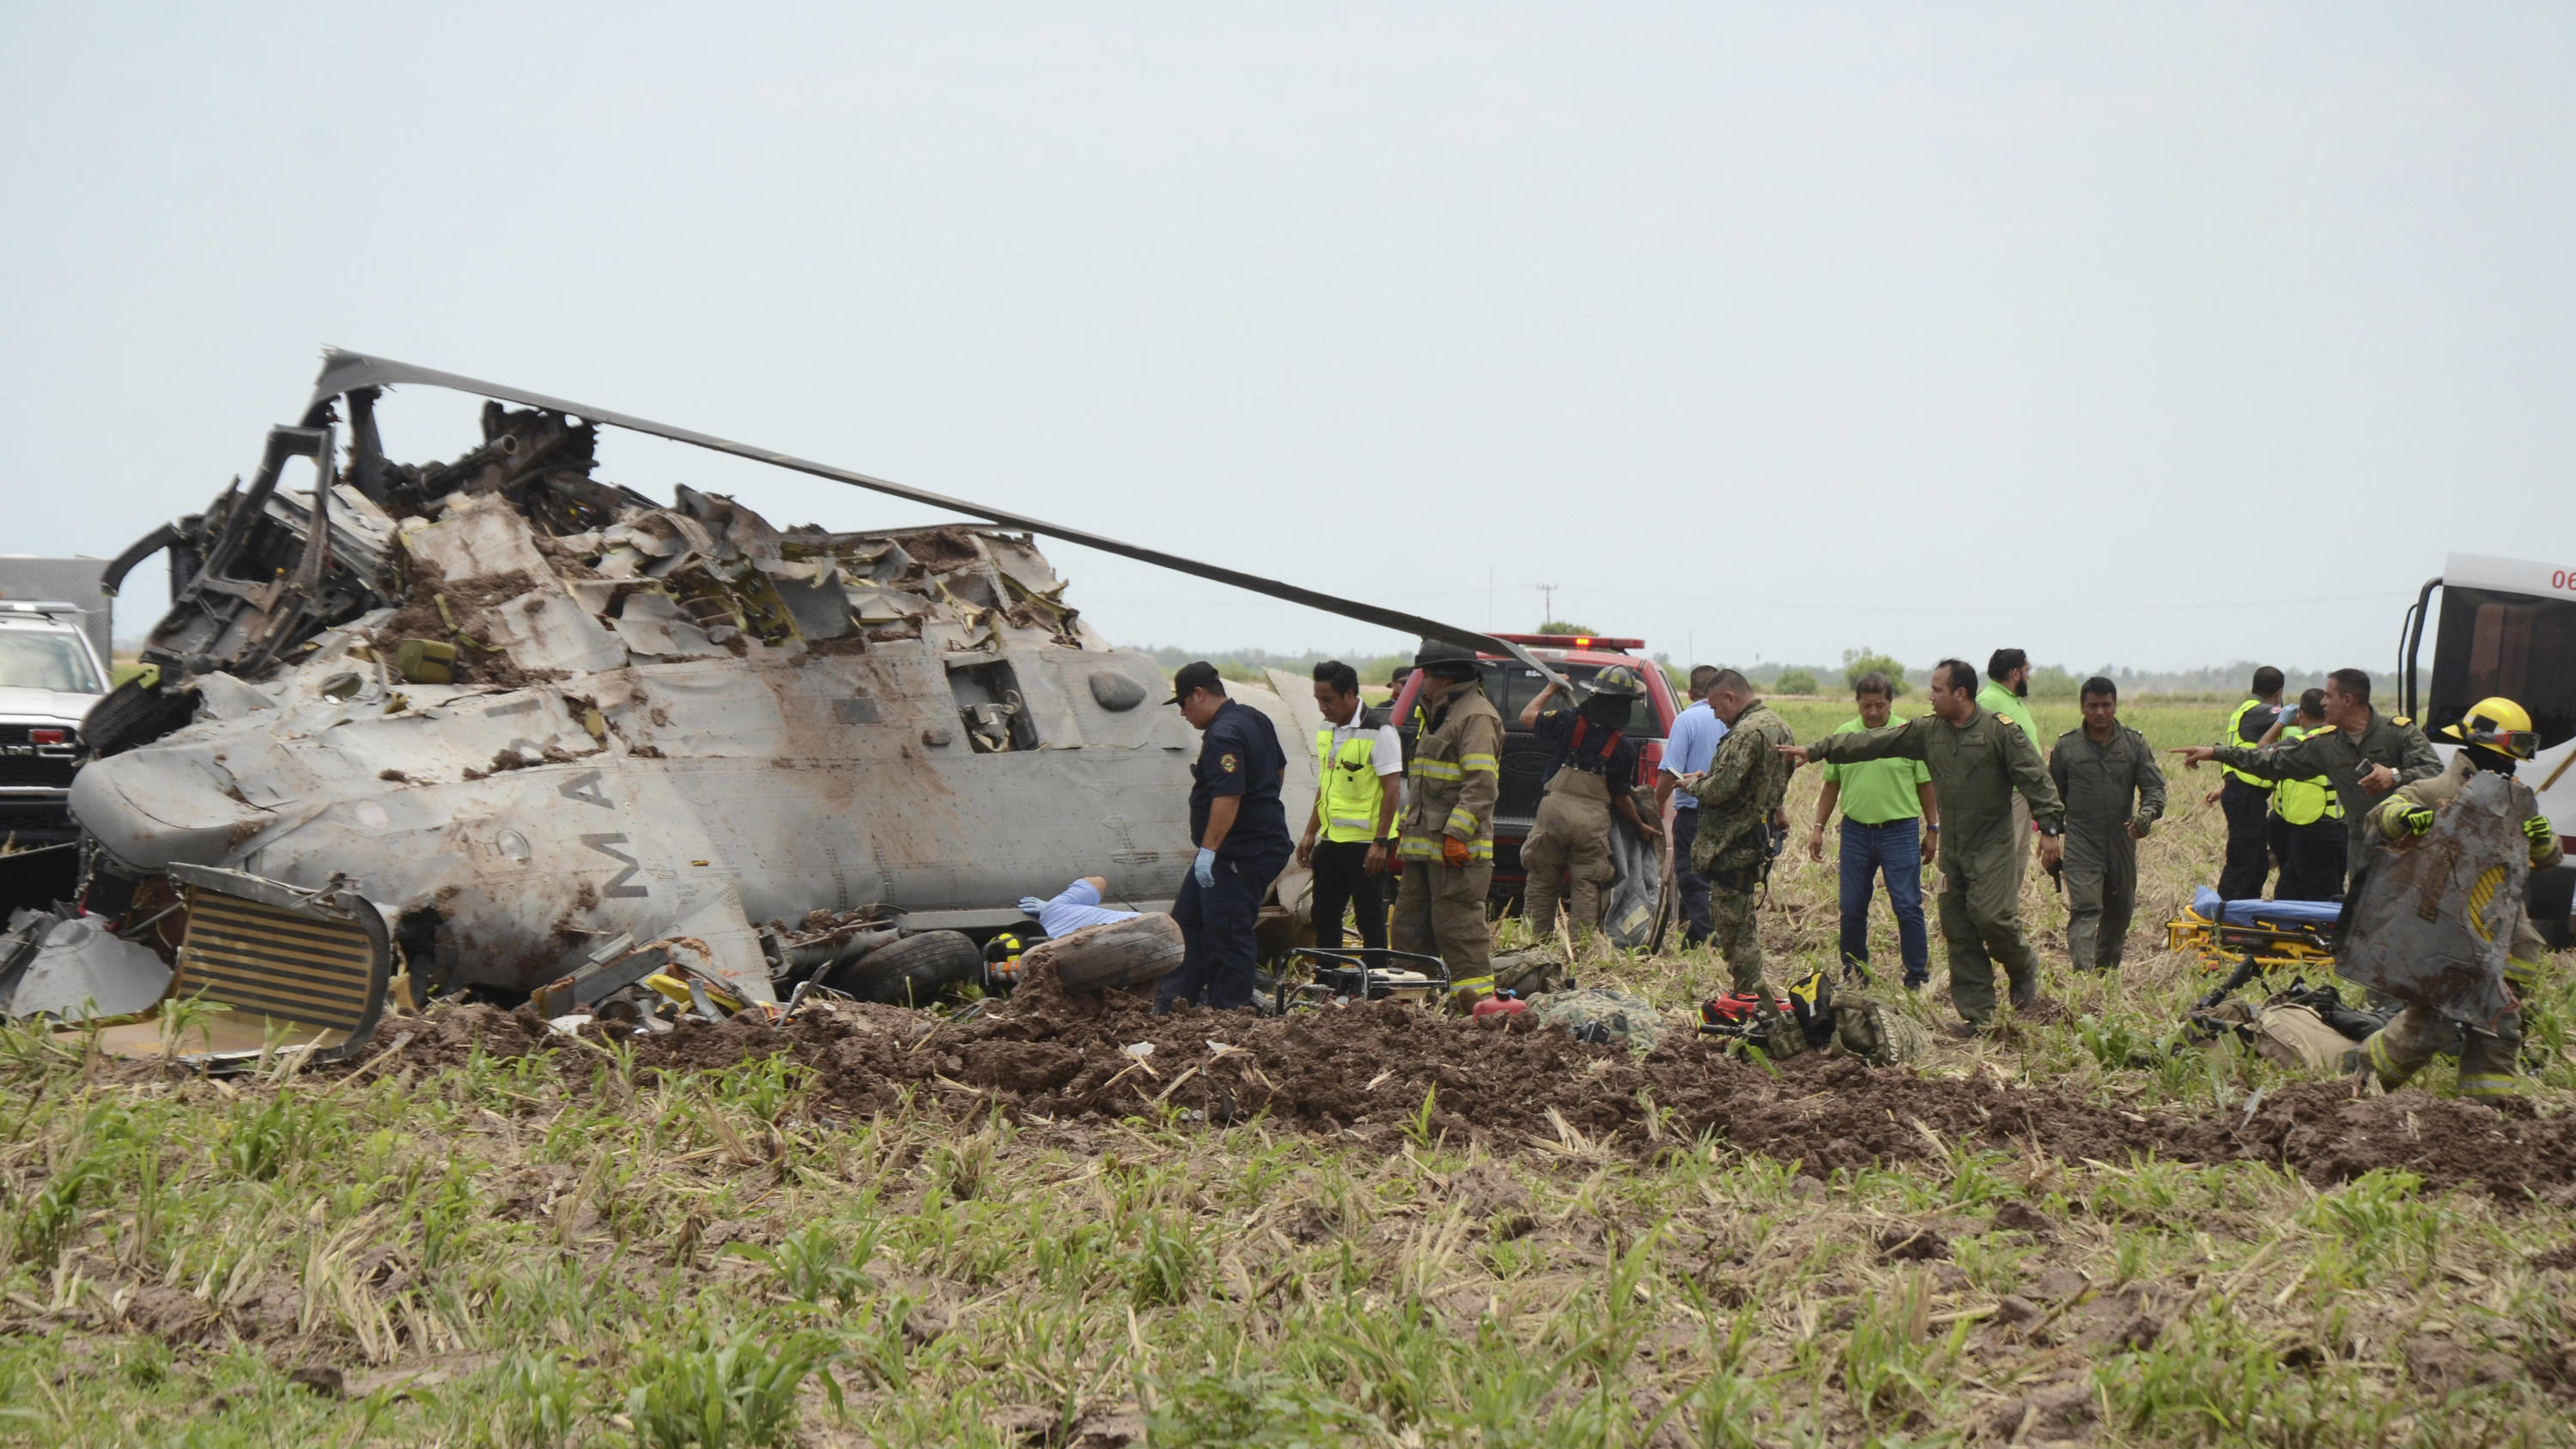 Emergency personnel work next to a navy Blackhawk helicopter crashed after supporting those who conducted the capture of drug lord Rafael Caro Quintero, near Los Mochis, Sinaloa state, Mexico, Friday, July 15, 2022. Mexico's navy said multiple people